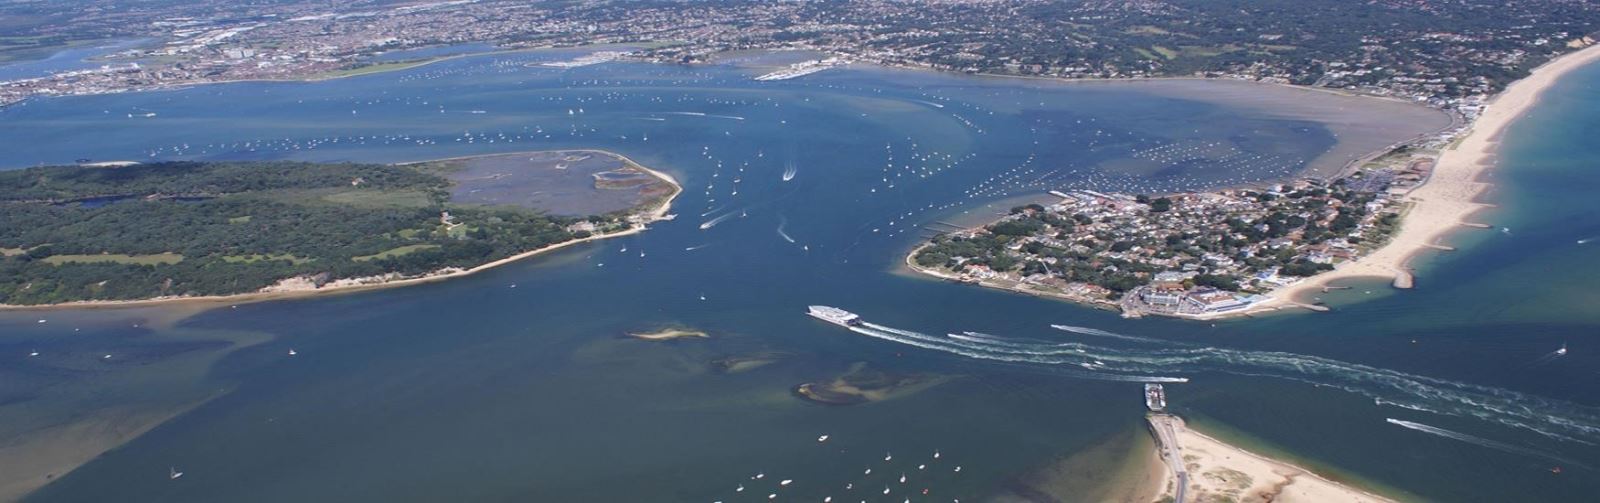 Poole Harbour Aerial View 